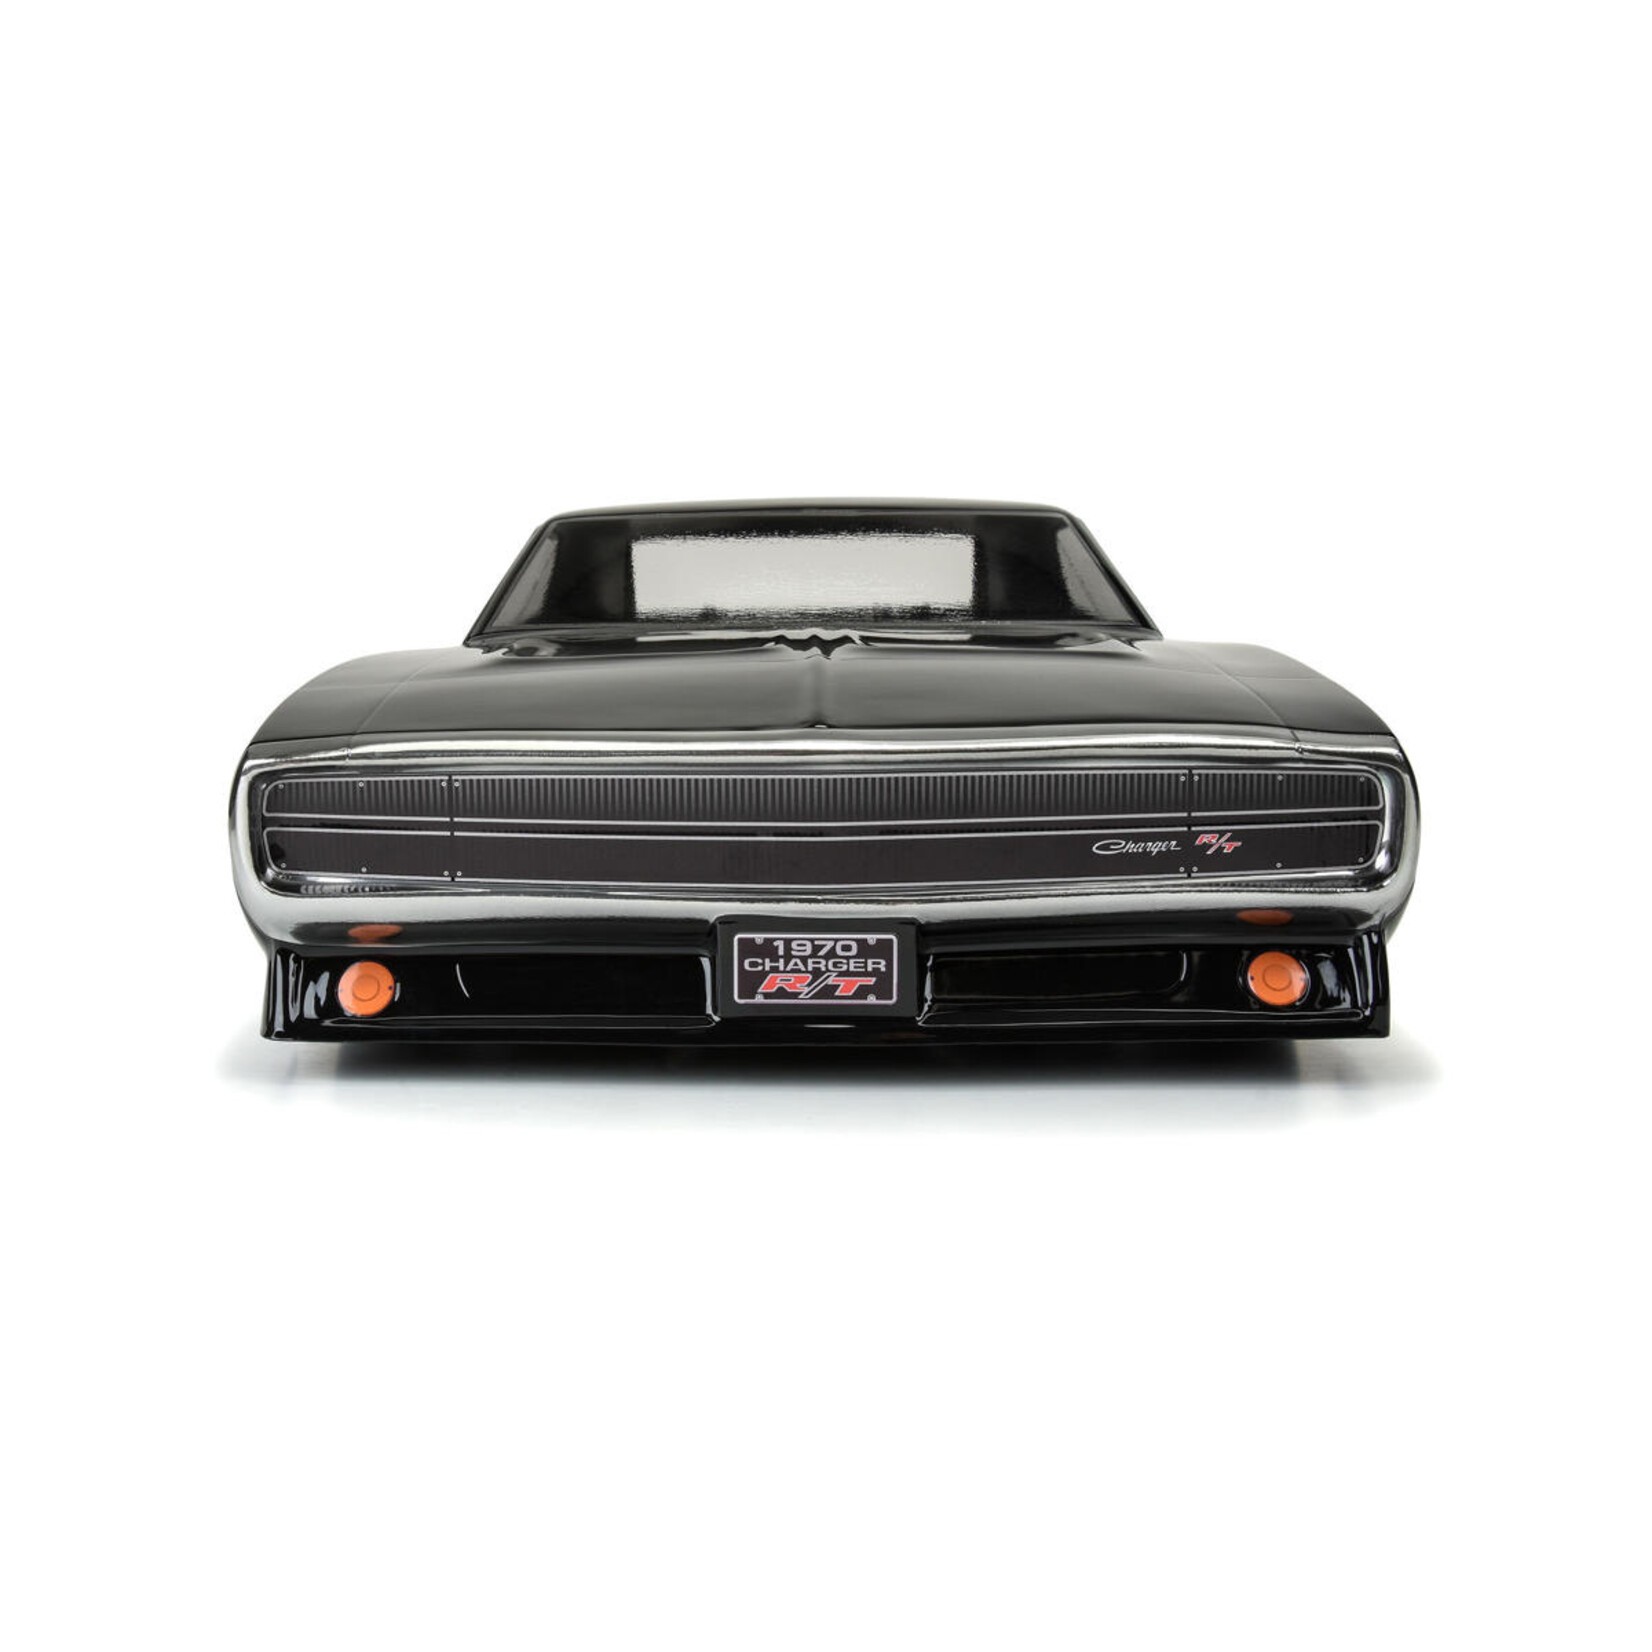 Pro-Line Pro-Line 1970 Dodge Charger No Prep Drag Racing Body (Clear) #3599-00